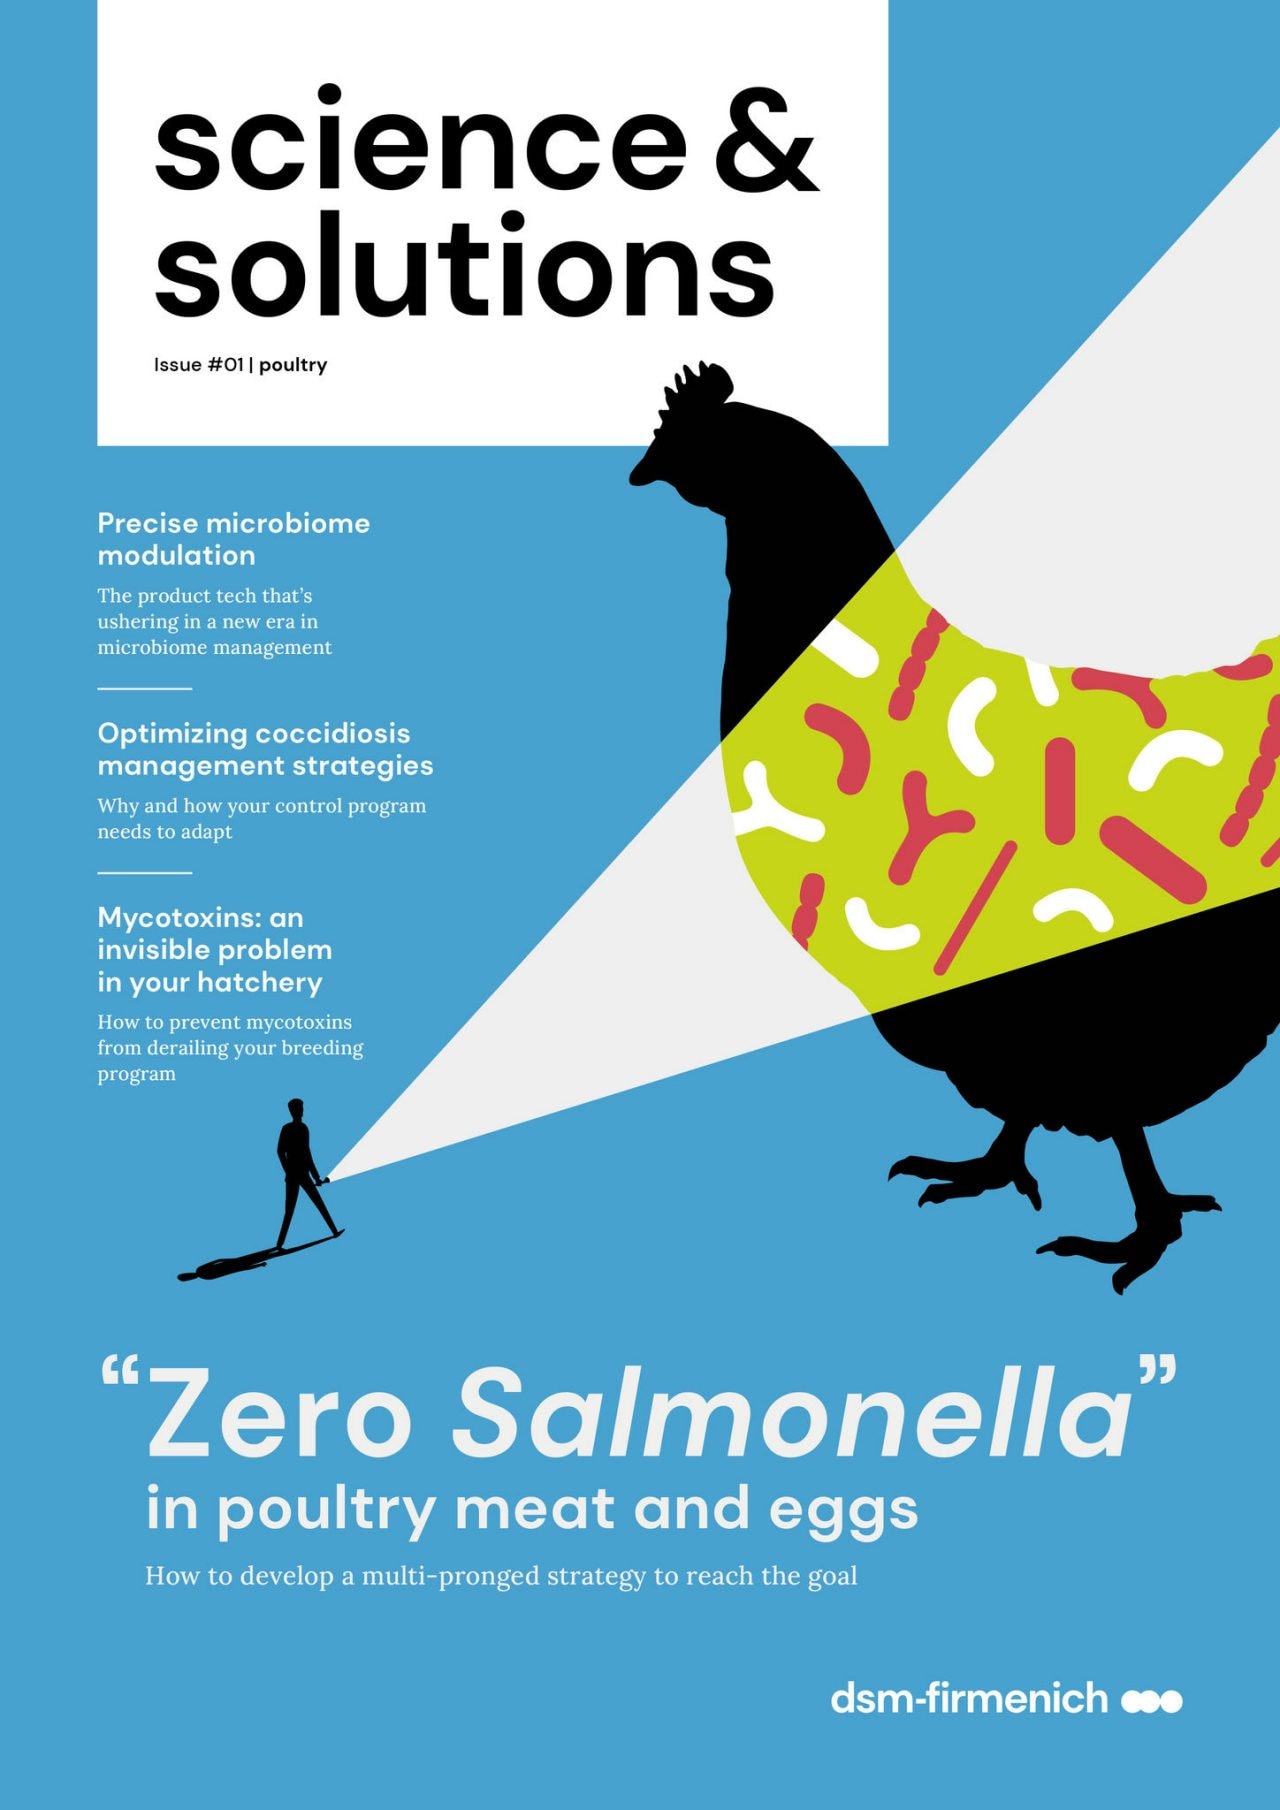 DSM Science & Solutions Issue #1 Poultry